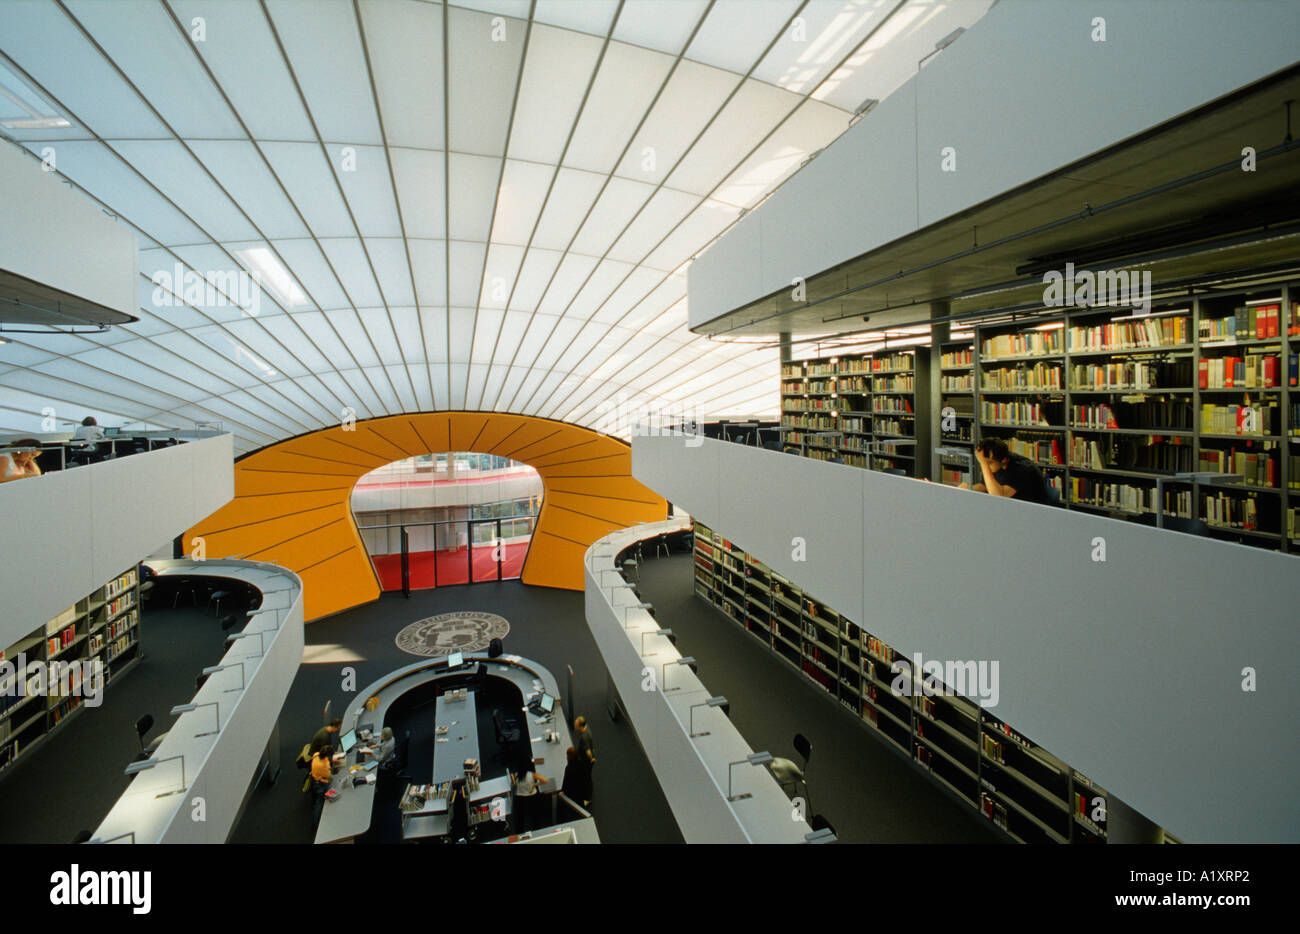 Philological Library of Freie Universitaet Berlin by architect Sir Norman Foster, Berlin Dahlem Zehlendorf, Berlin, Germany. Stock Photo